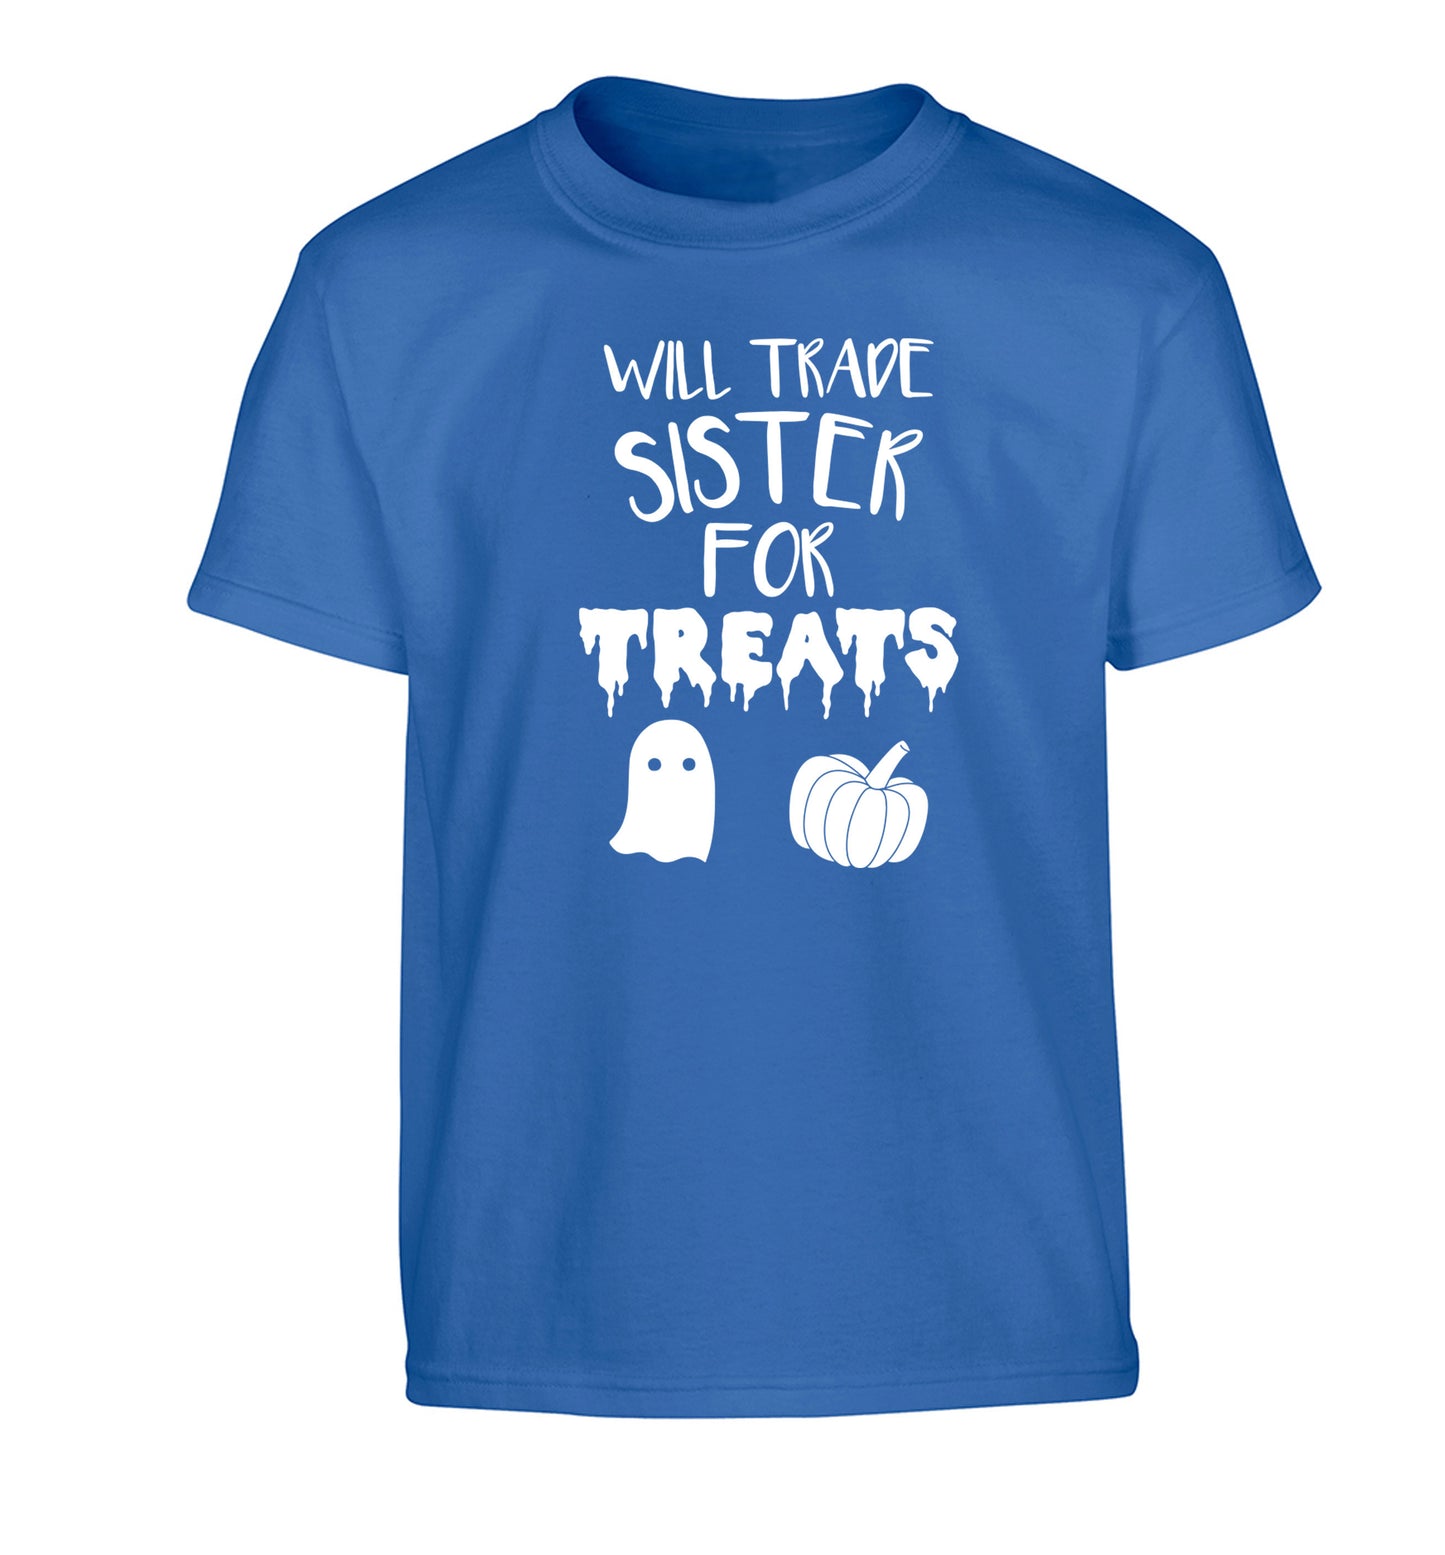 Will trade sister for treats Children's blue Tshirt 12-14 Years